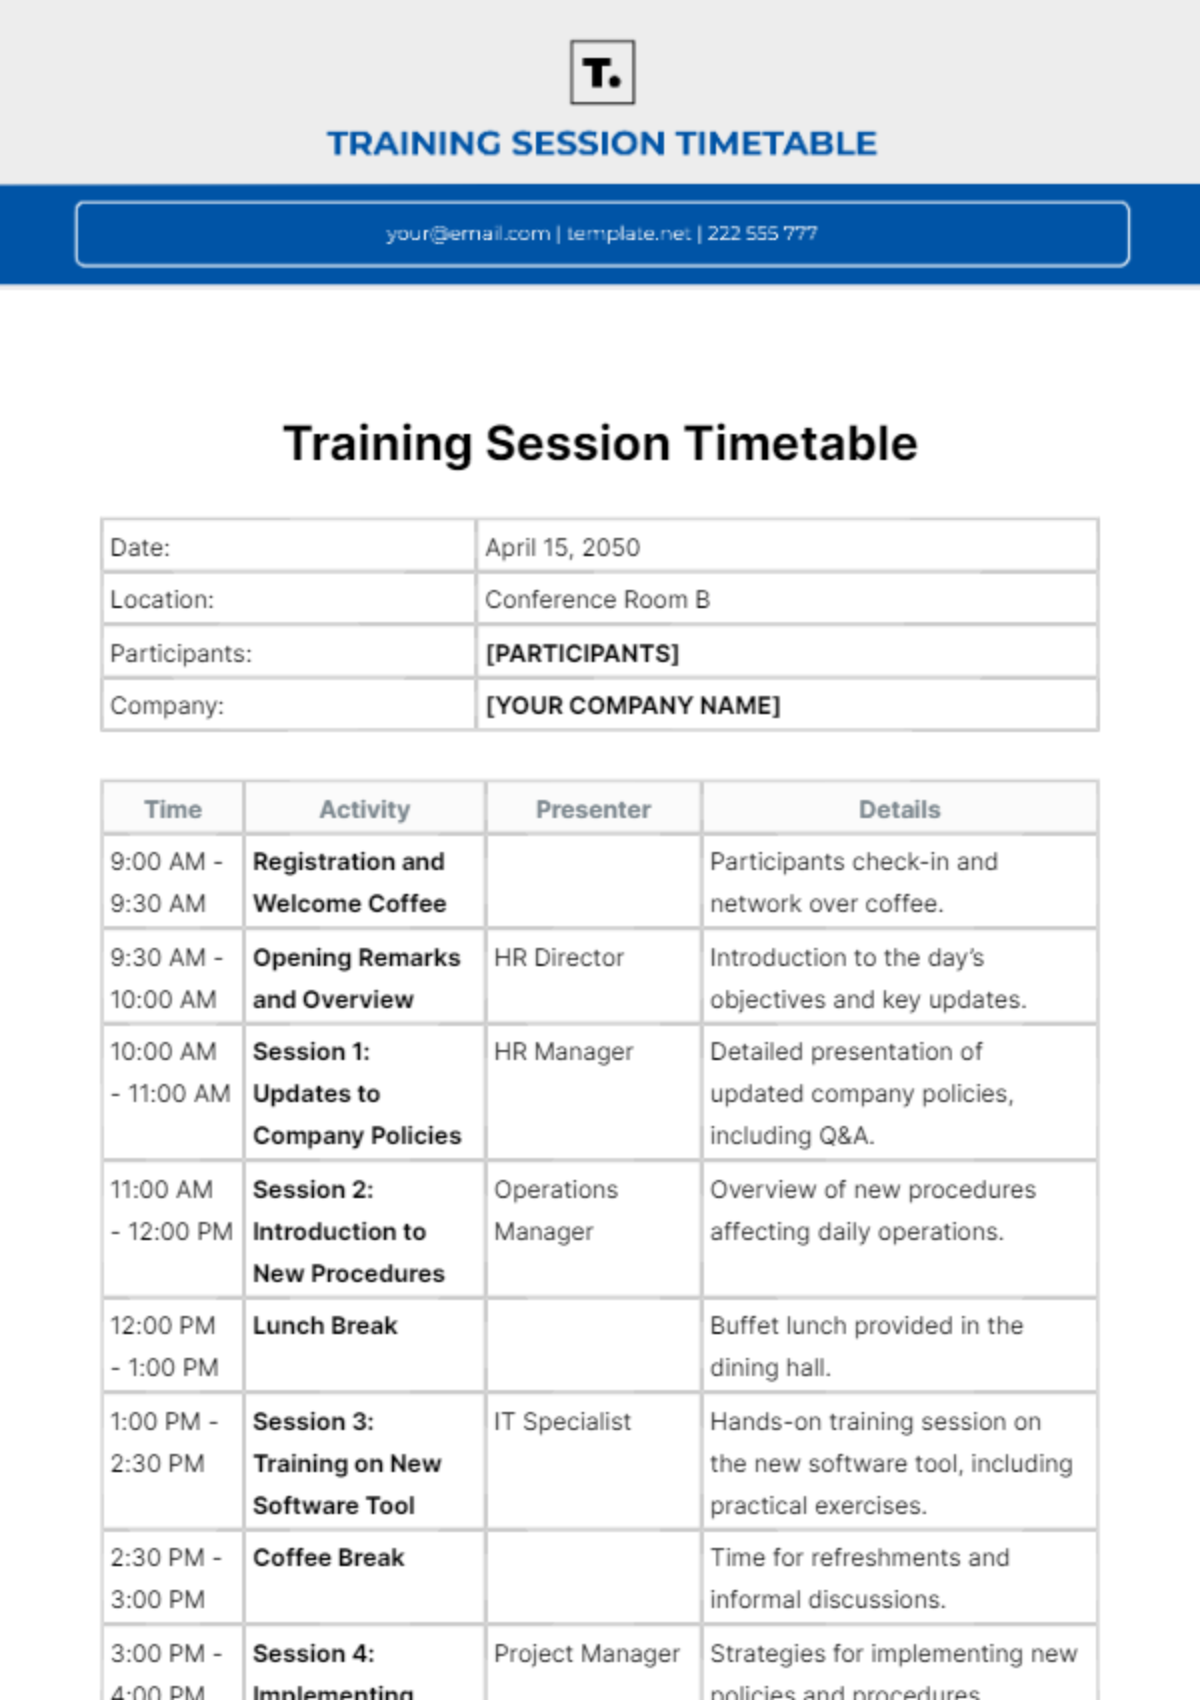 Training Session Timetable Template